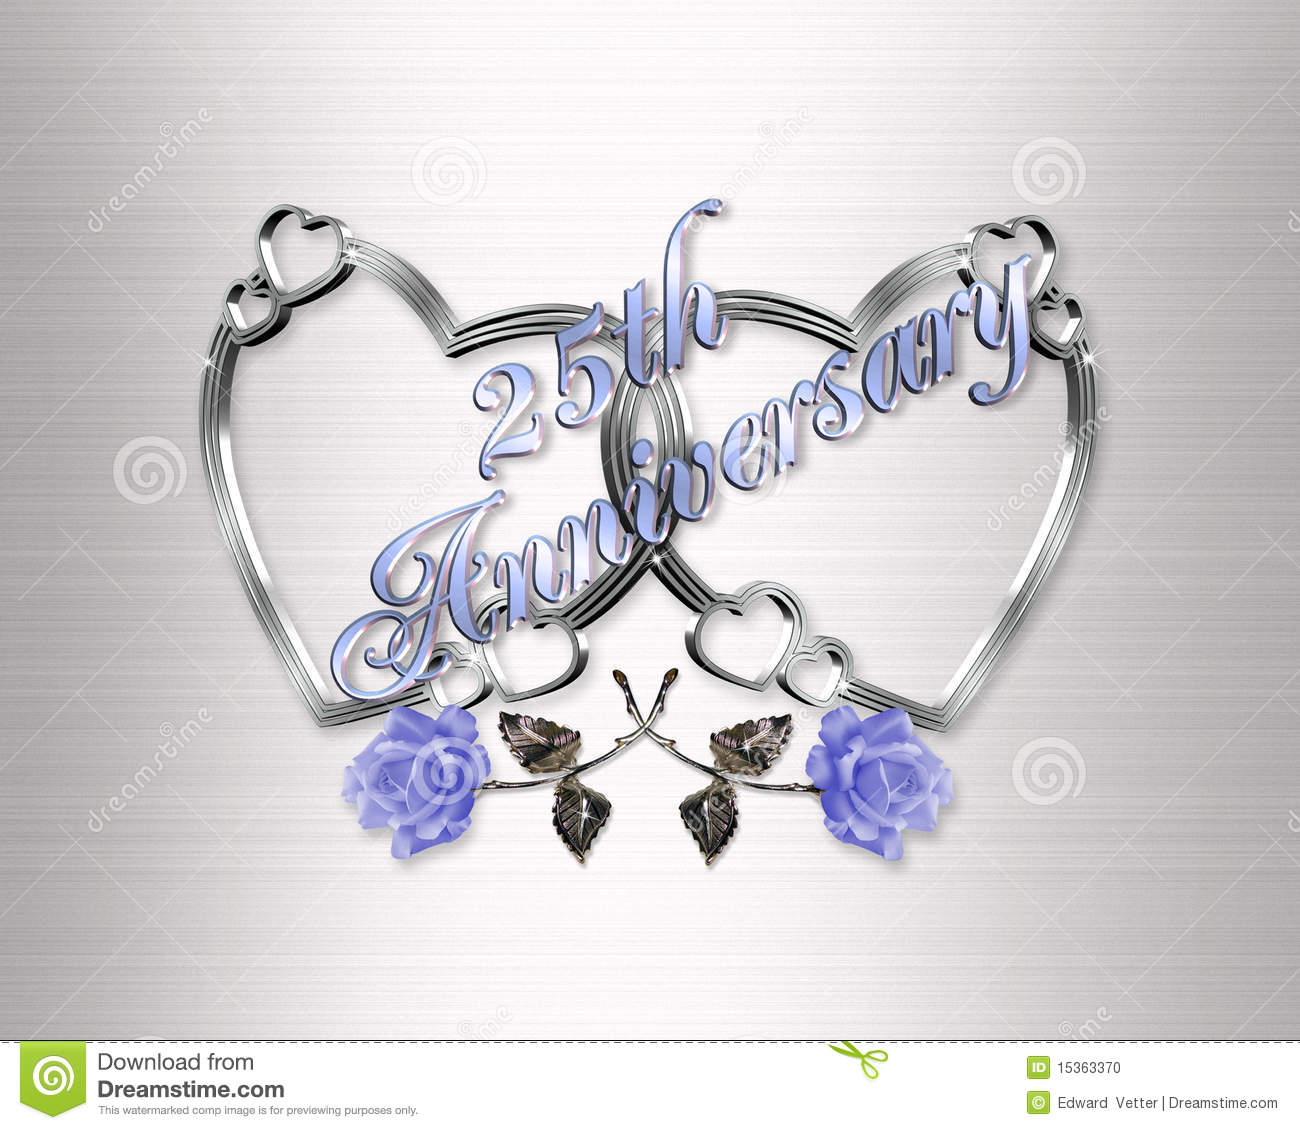 Wedding Anniversary Greeting Card Or Formal Invitation With Silver